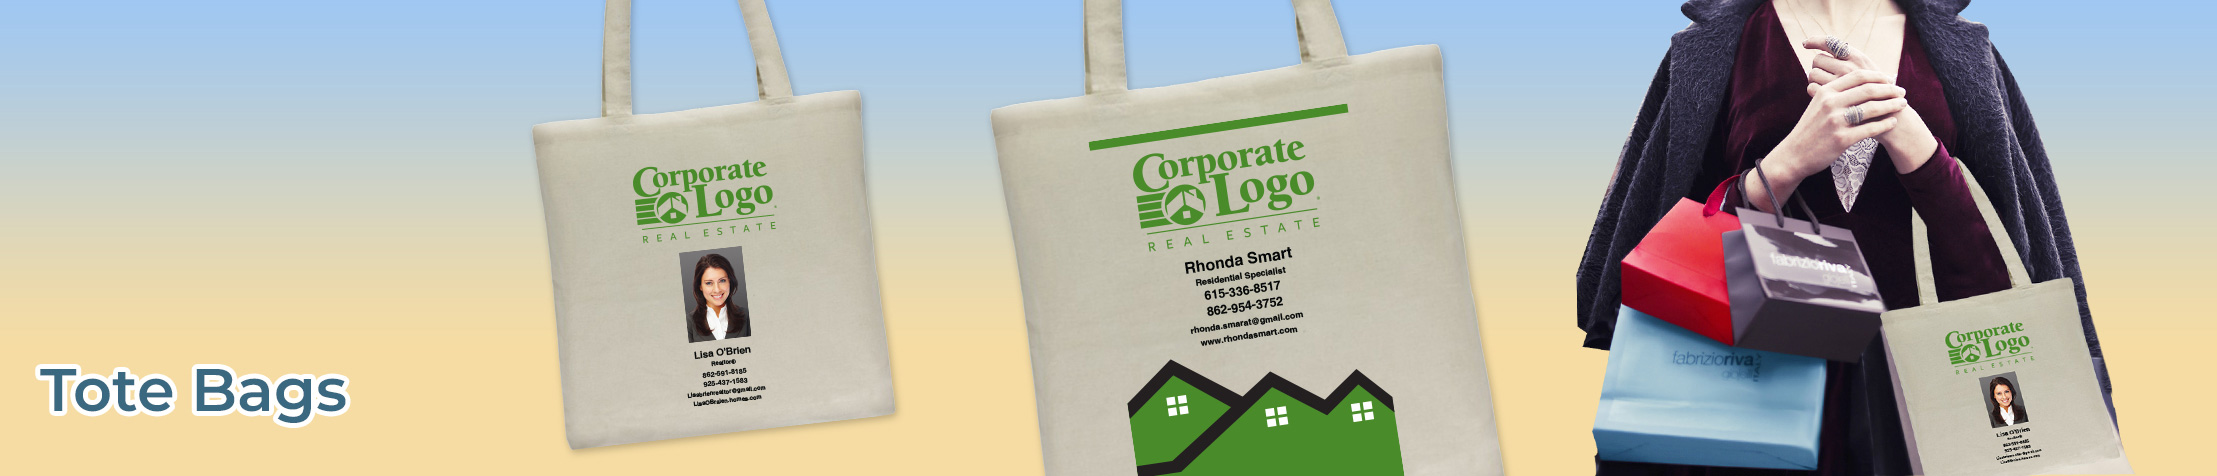 Better Homes and Gardens Real Estate Tote Bags - BHGRE  personalized realtor promotional products | BestPrintBuy.com